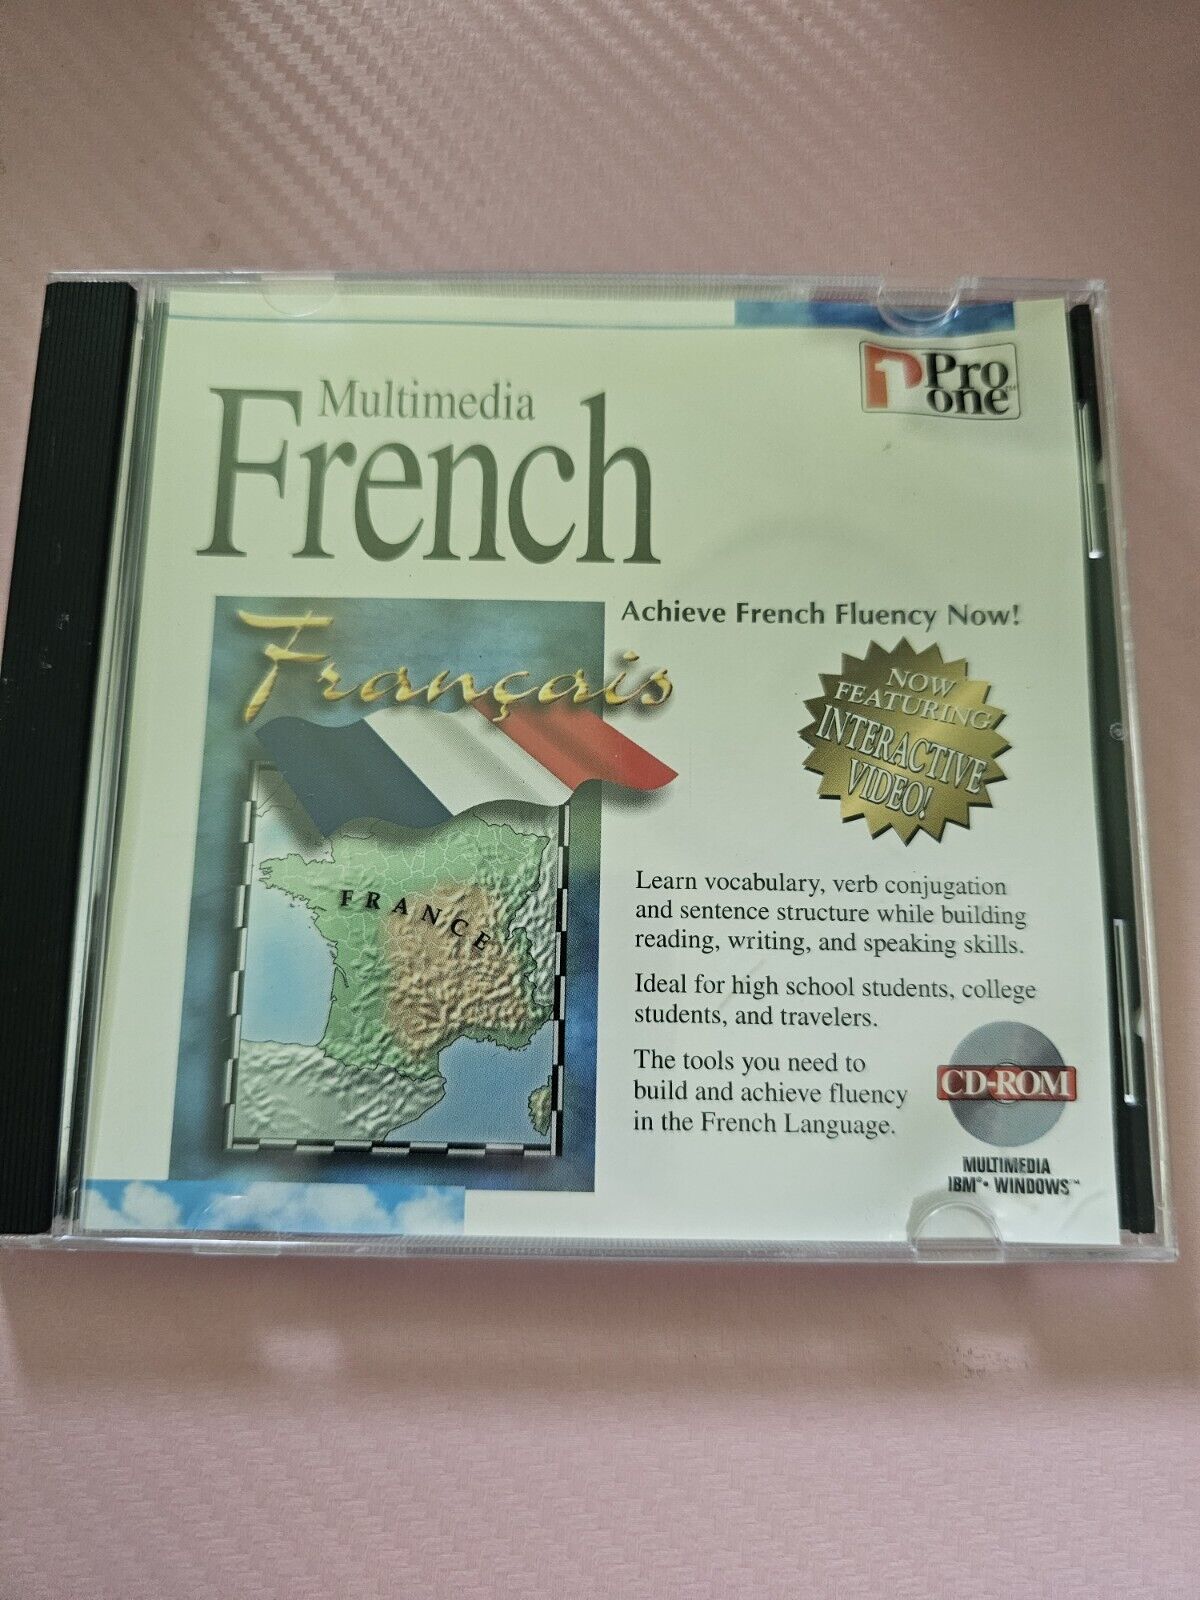 Pro One Multimedia  FRENCH, (PC, Cd--Rom, IBM )[Win 3.1, Win95]Open Used